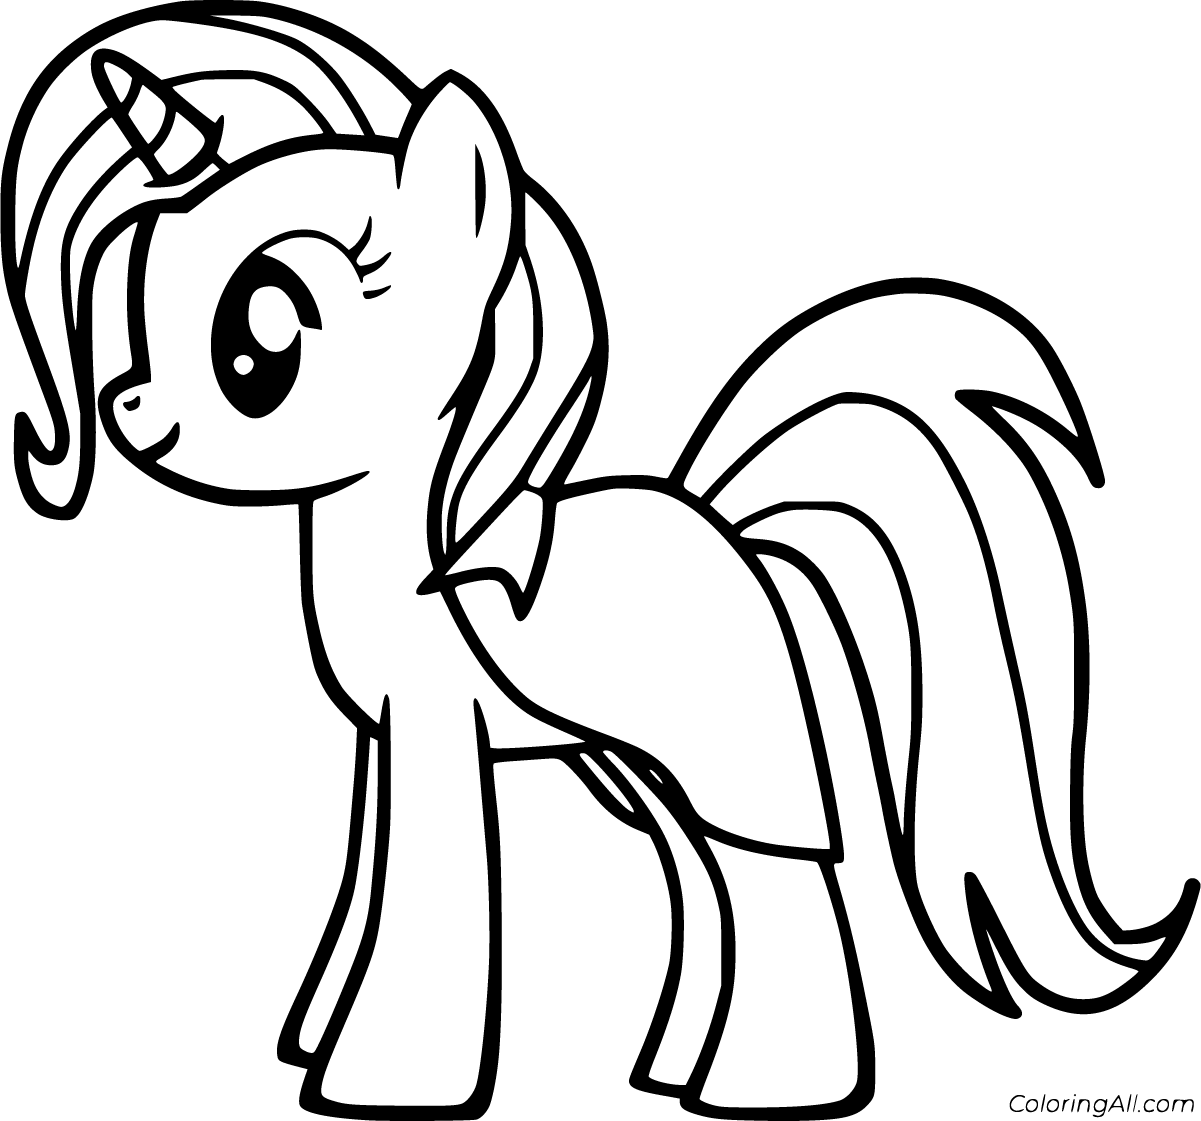 My Little Pony Coloring Pages   ColoringAll